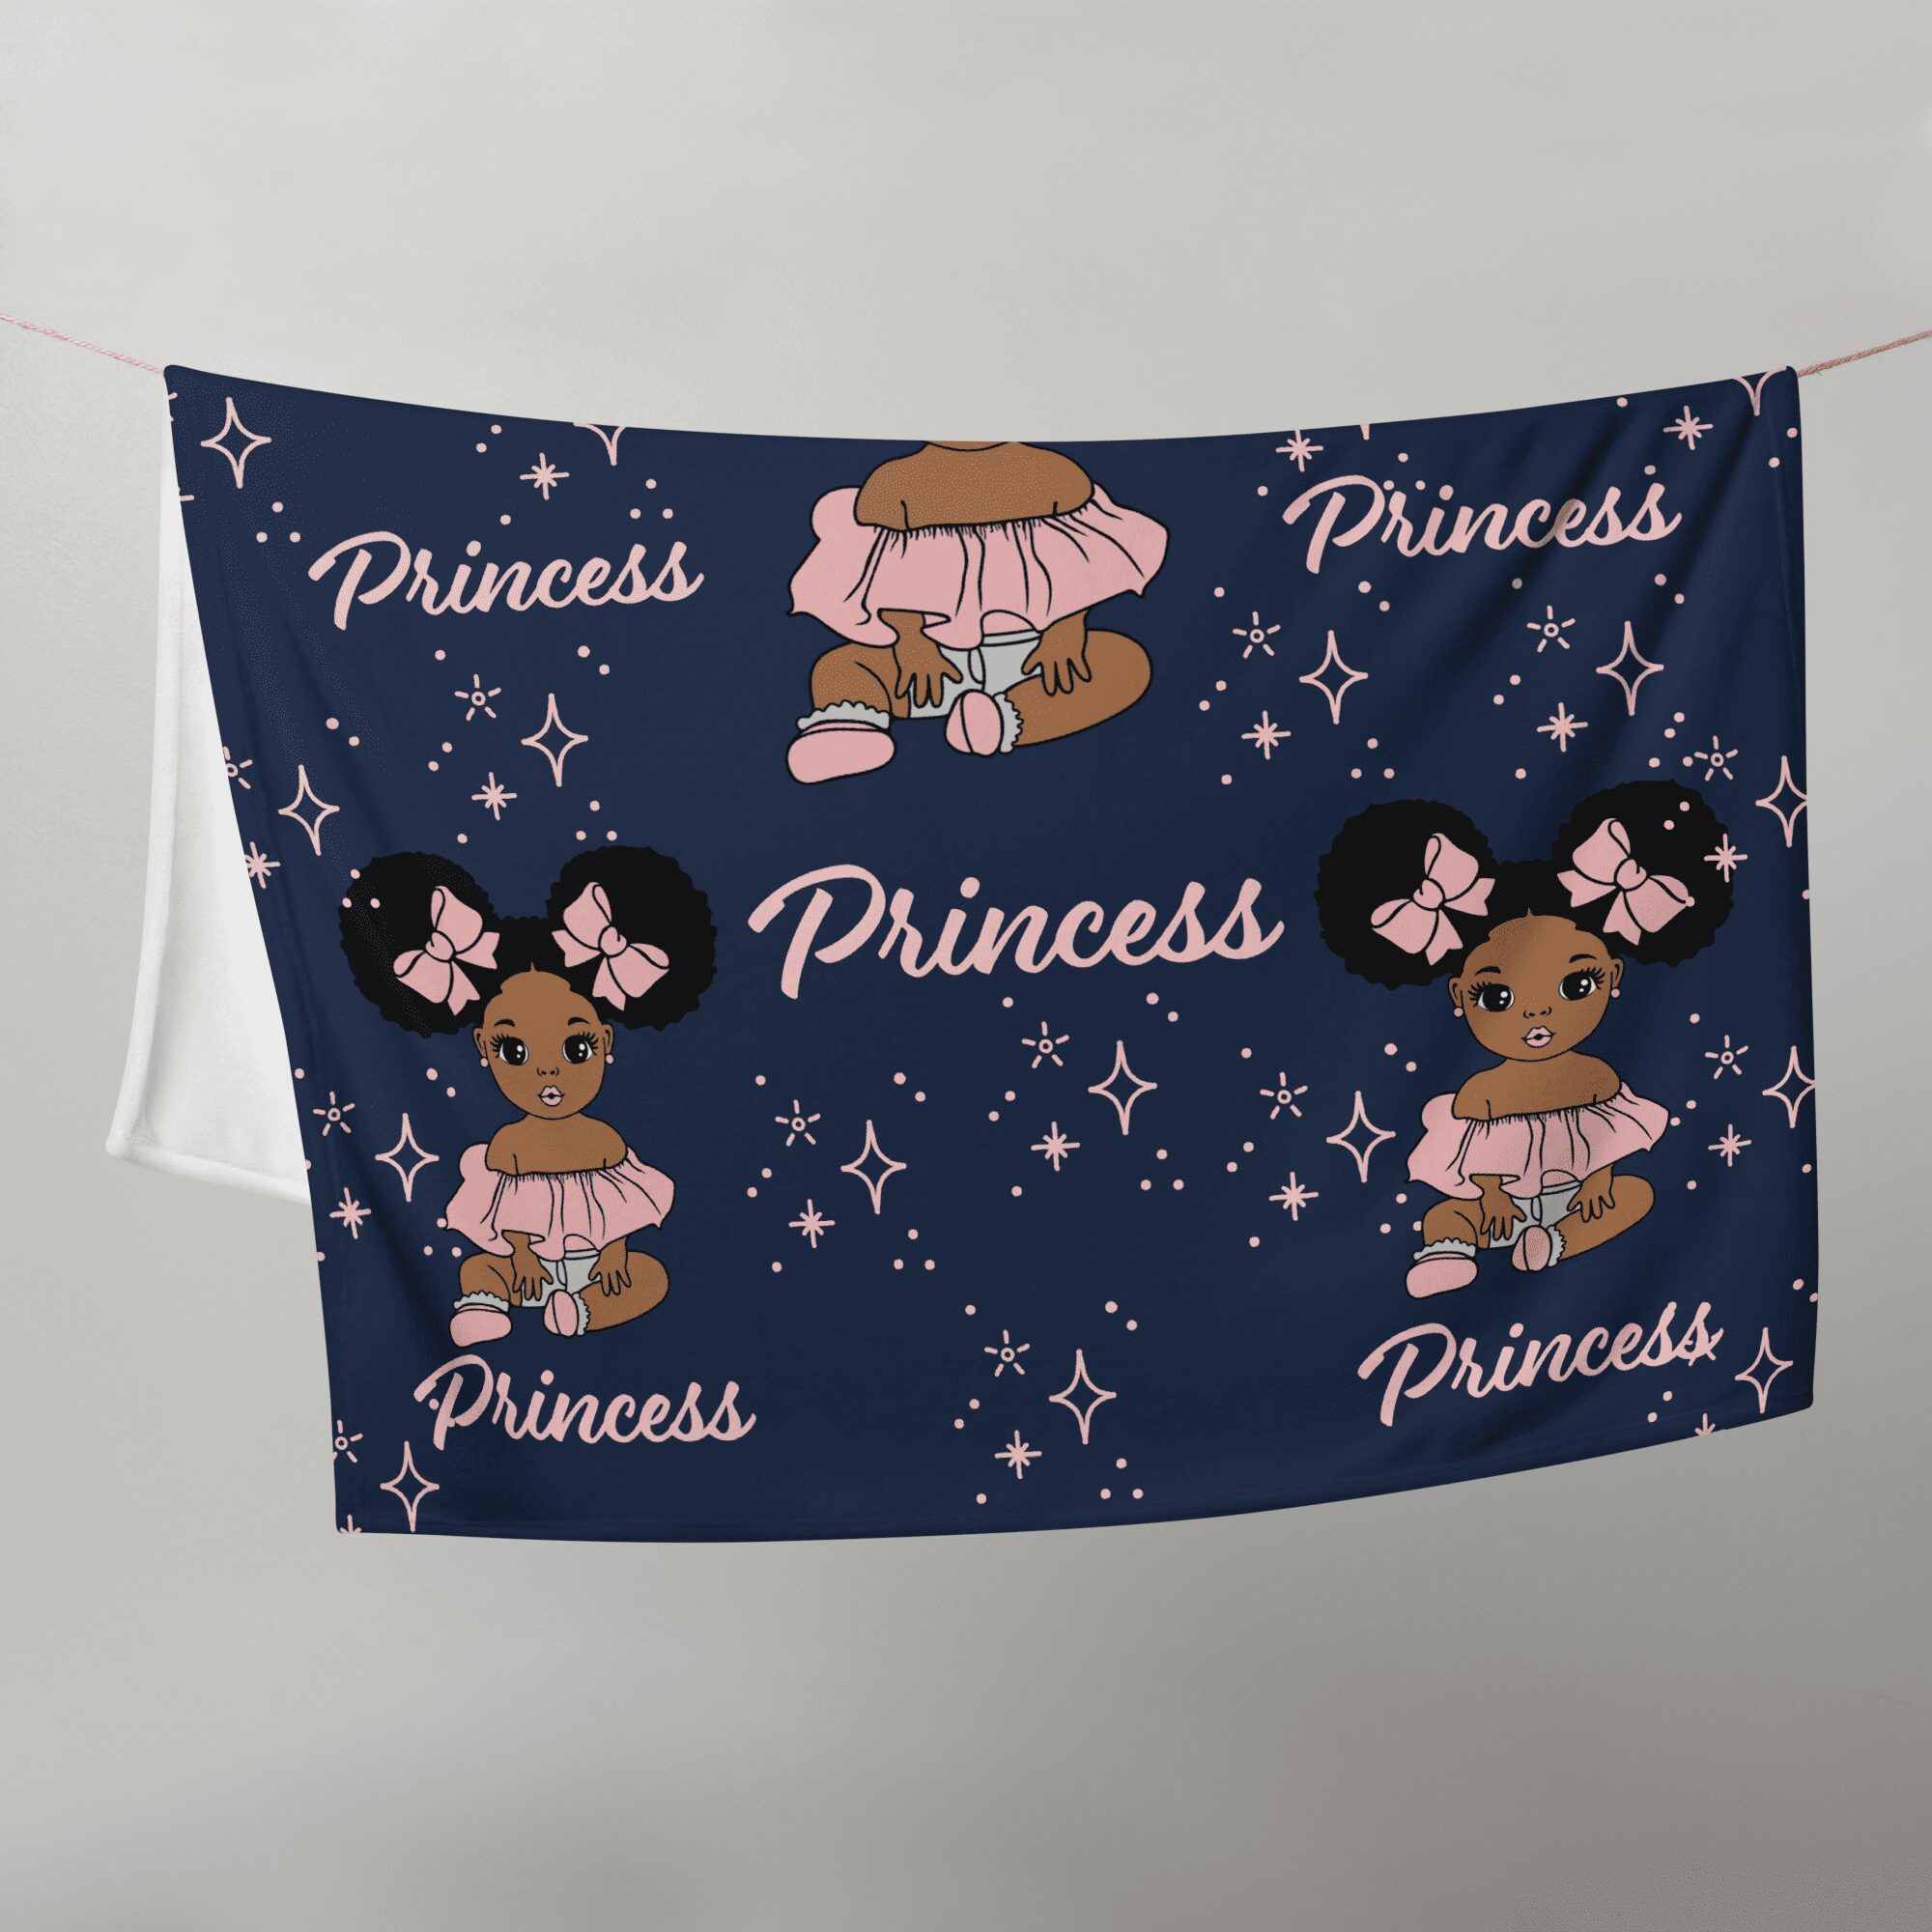 Personalised Princess Baby Blanket, wakuda, african print fans, black-owned brands, black pound day